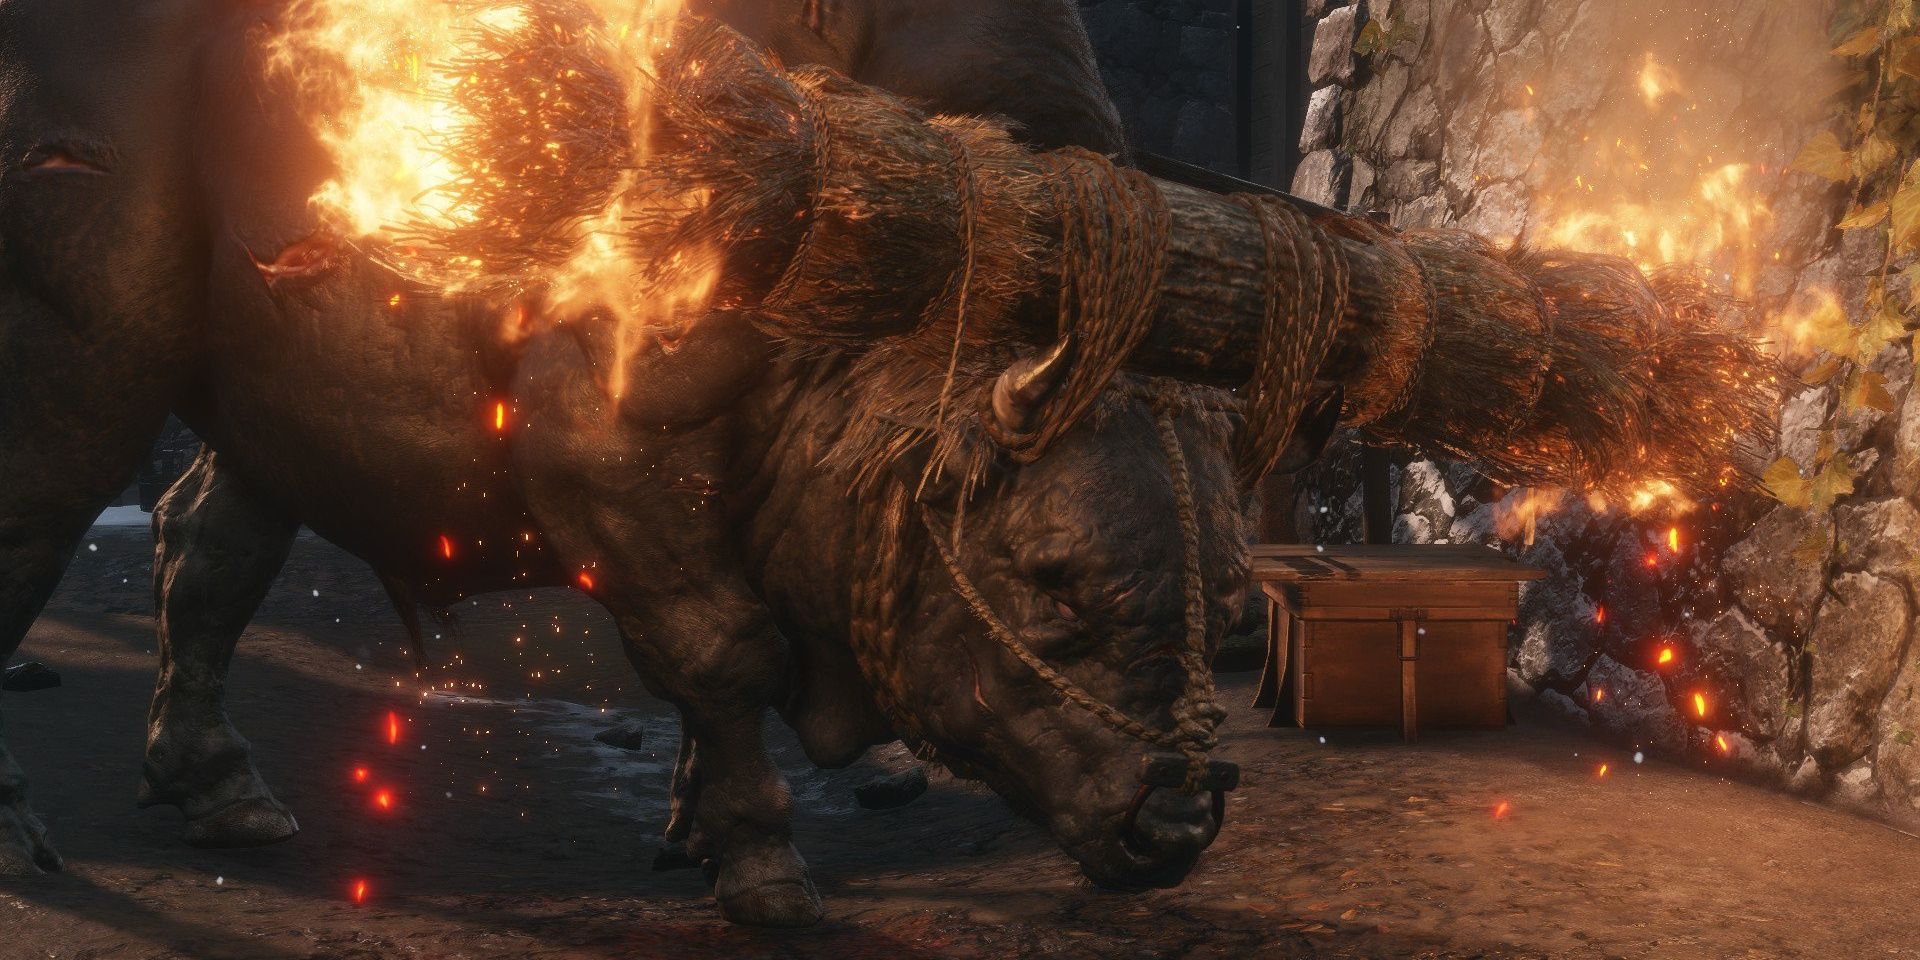 The Blazing Bull from Sekiro charging while its horns are on fire